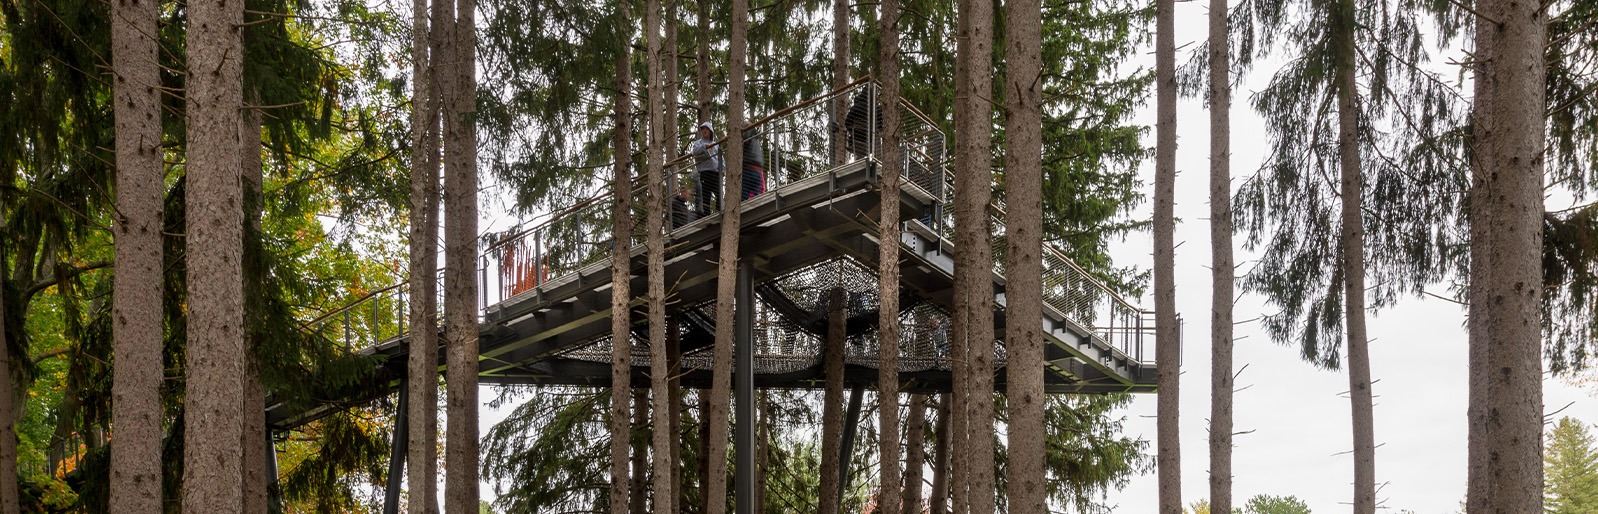 Whiting Forest Canopy Walk in Midland, Michigan